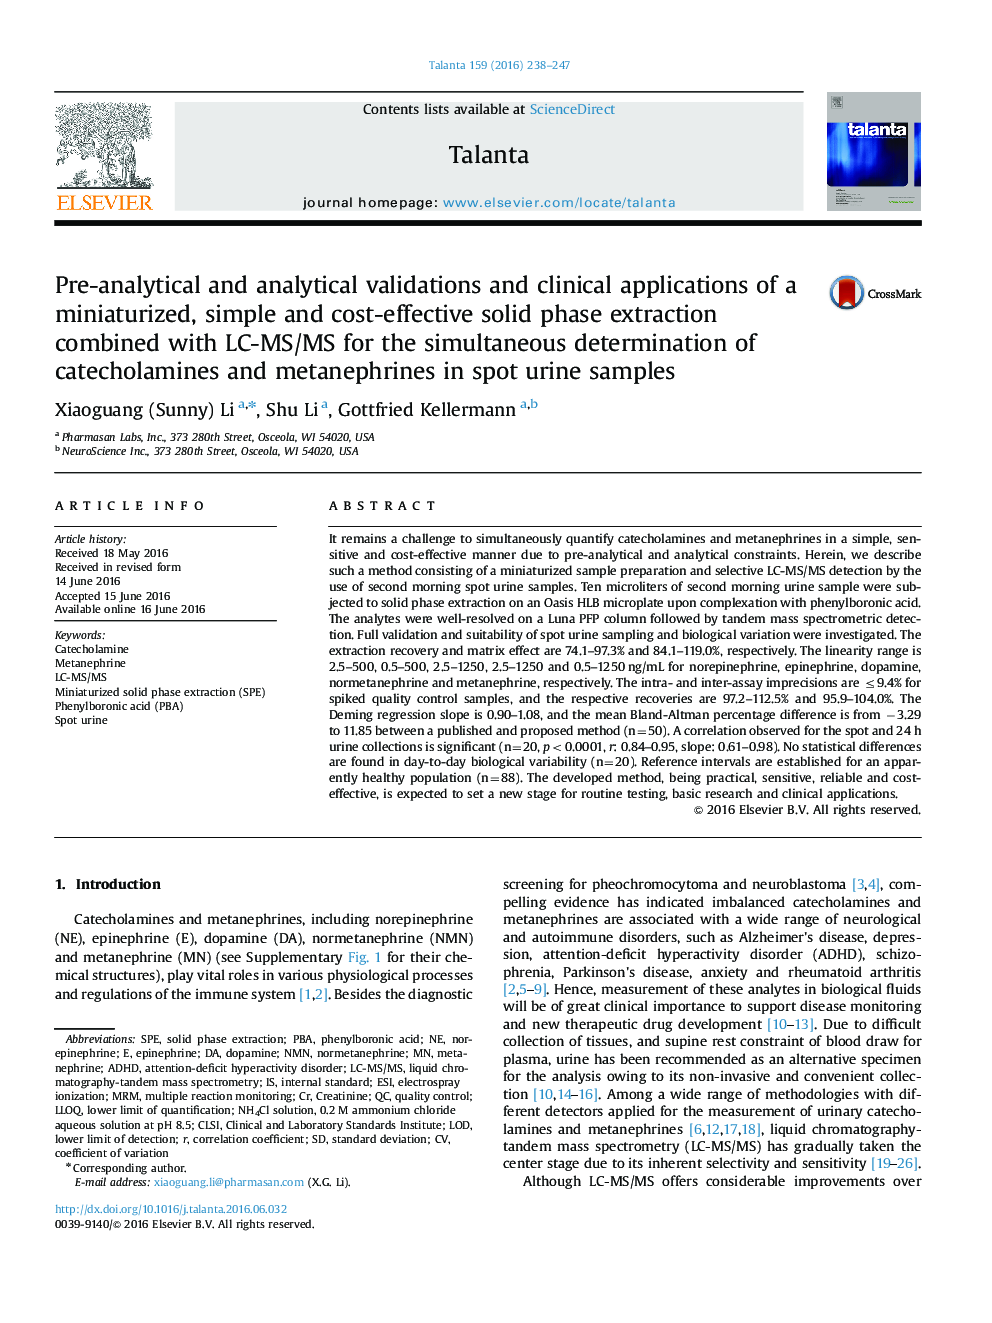 Pre-analytical and analytical validations and clinical applications of a miniaturized, simple and cost-effective solid phase extraction combined with LC-MS/MS for the simultaneous determination of catecholamines and metanephrines in spot urine samples